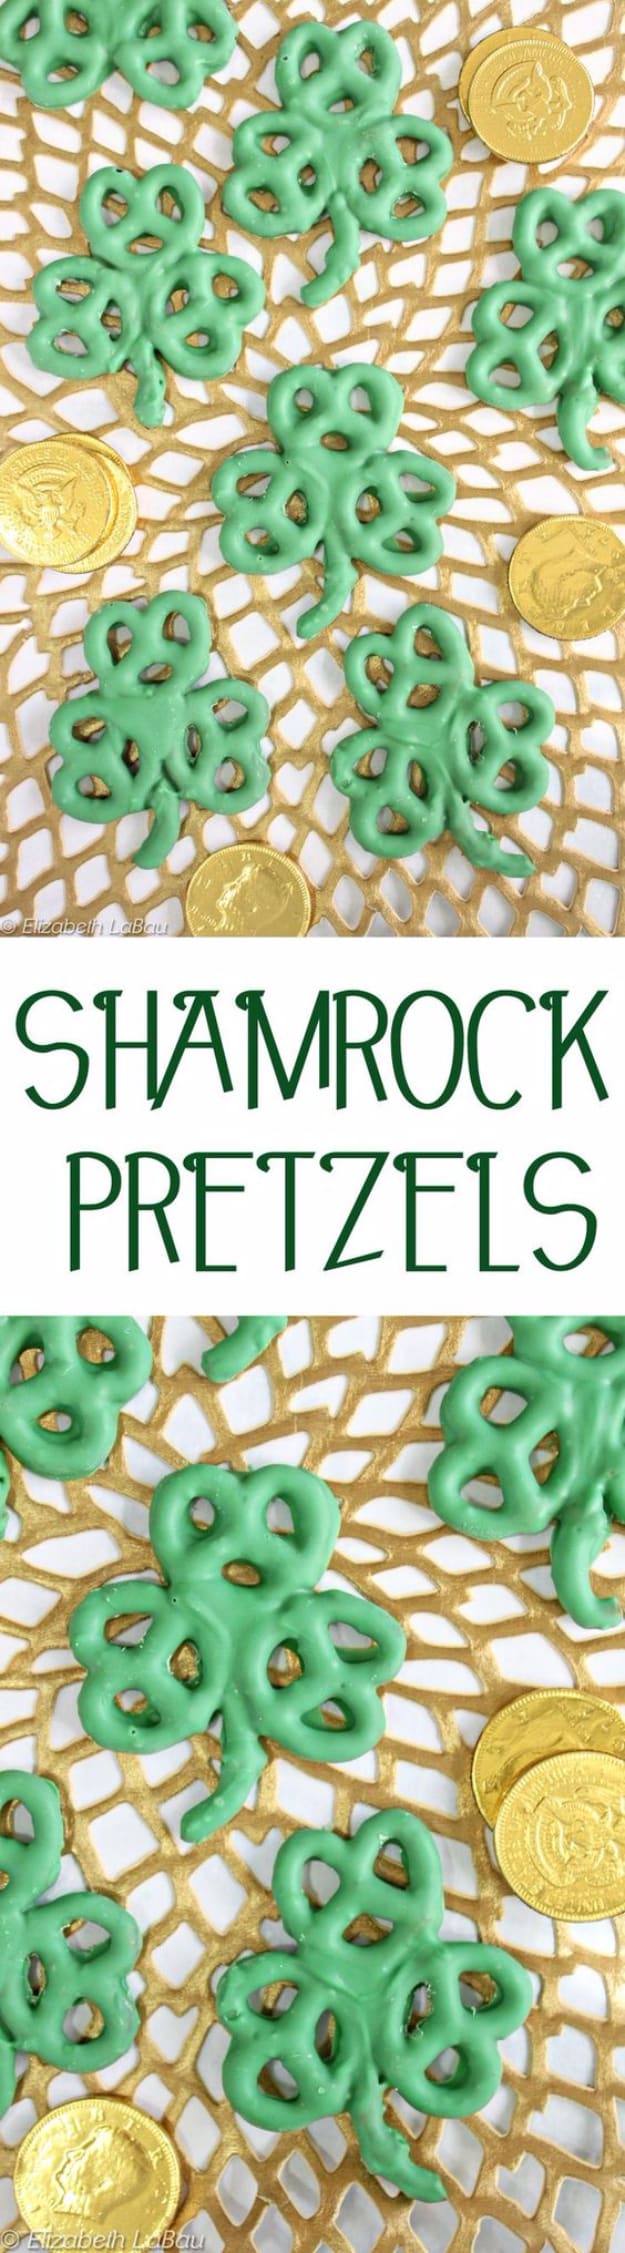 DIY St Patricks Day Ideas - 2 Ingredient Shamrock Pretzels - Food and Best Recipes, Decorations and Home Decor, Party Ideas - Cupcakes, Drinks, Festive St Patrick Day Parties With these Easy, Quick and Cool Crafts and DIY Projects http://diyjoy.com/st-patricks-day-ideas